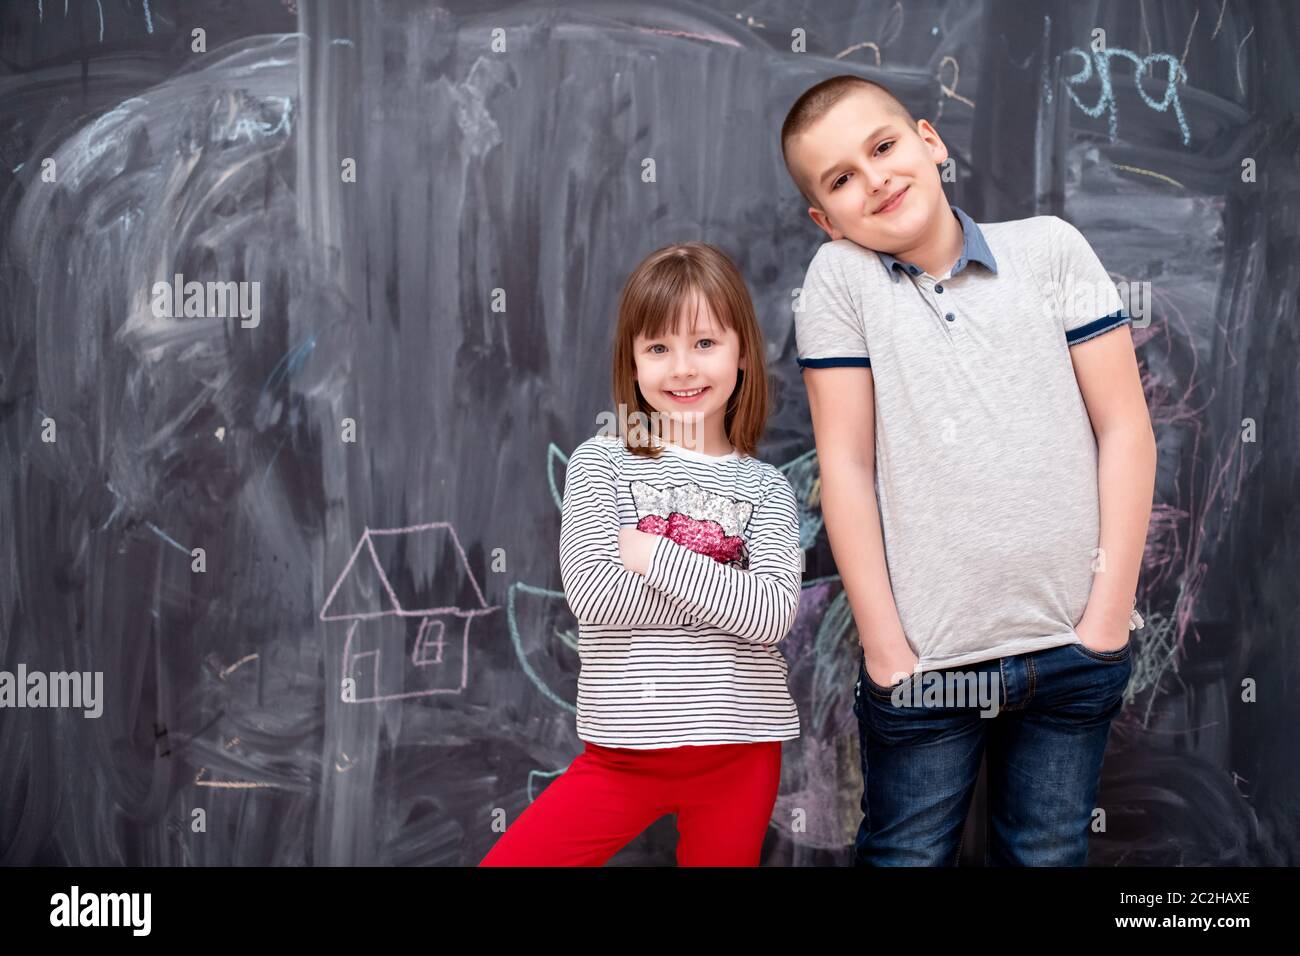 boy and little girl standing in front of chalkboard Stock Photo